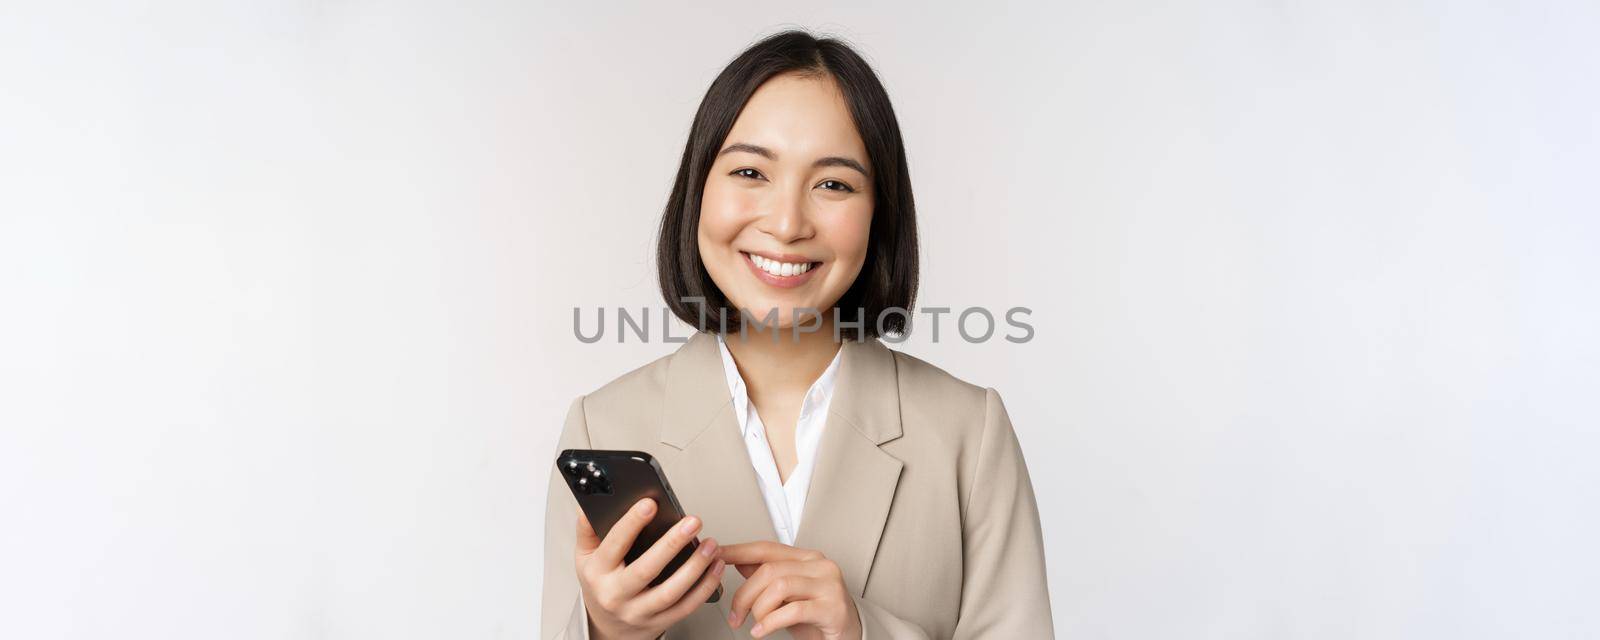 Close up portrait of korean woman, corporate lady in suit, using mobile phone and smiling, holding smartphone, standing over white background.